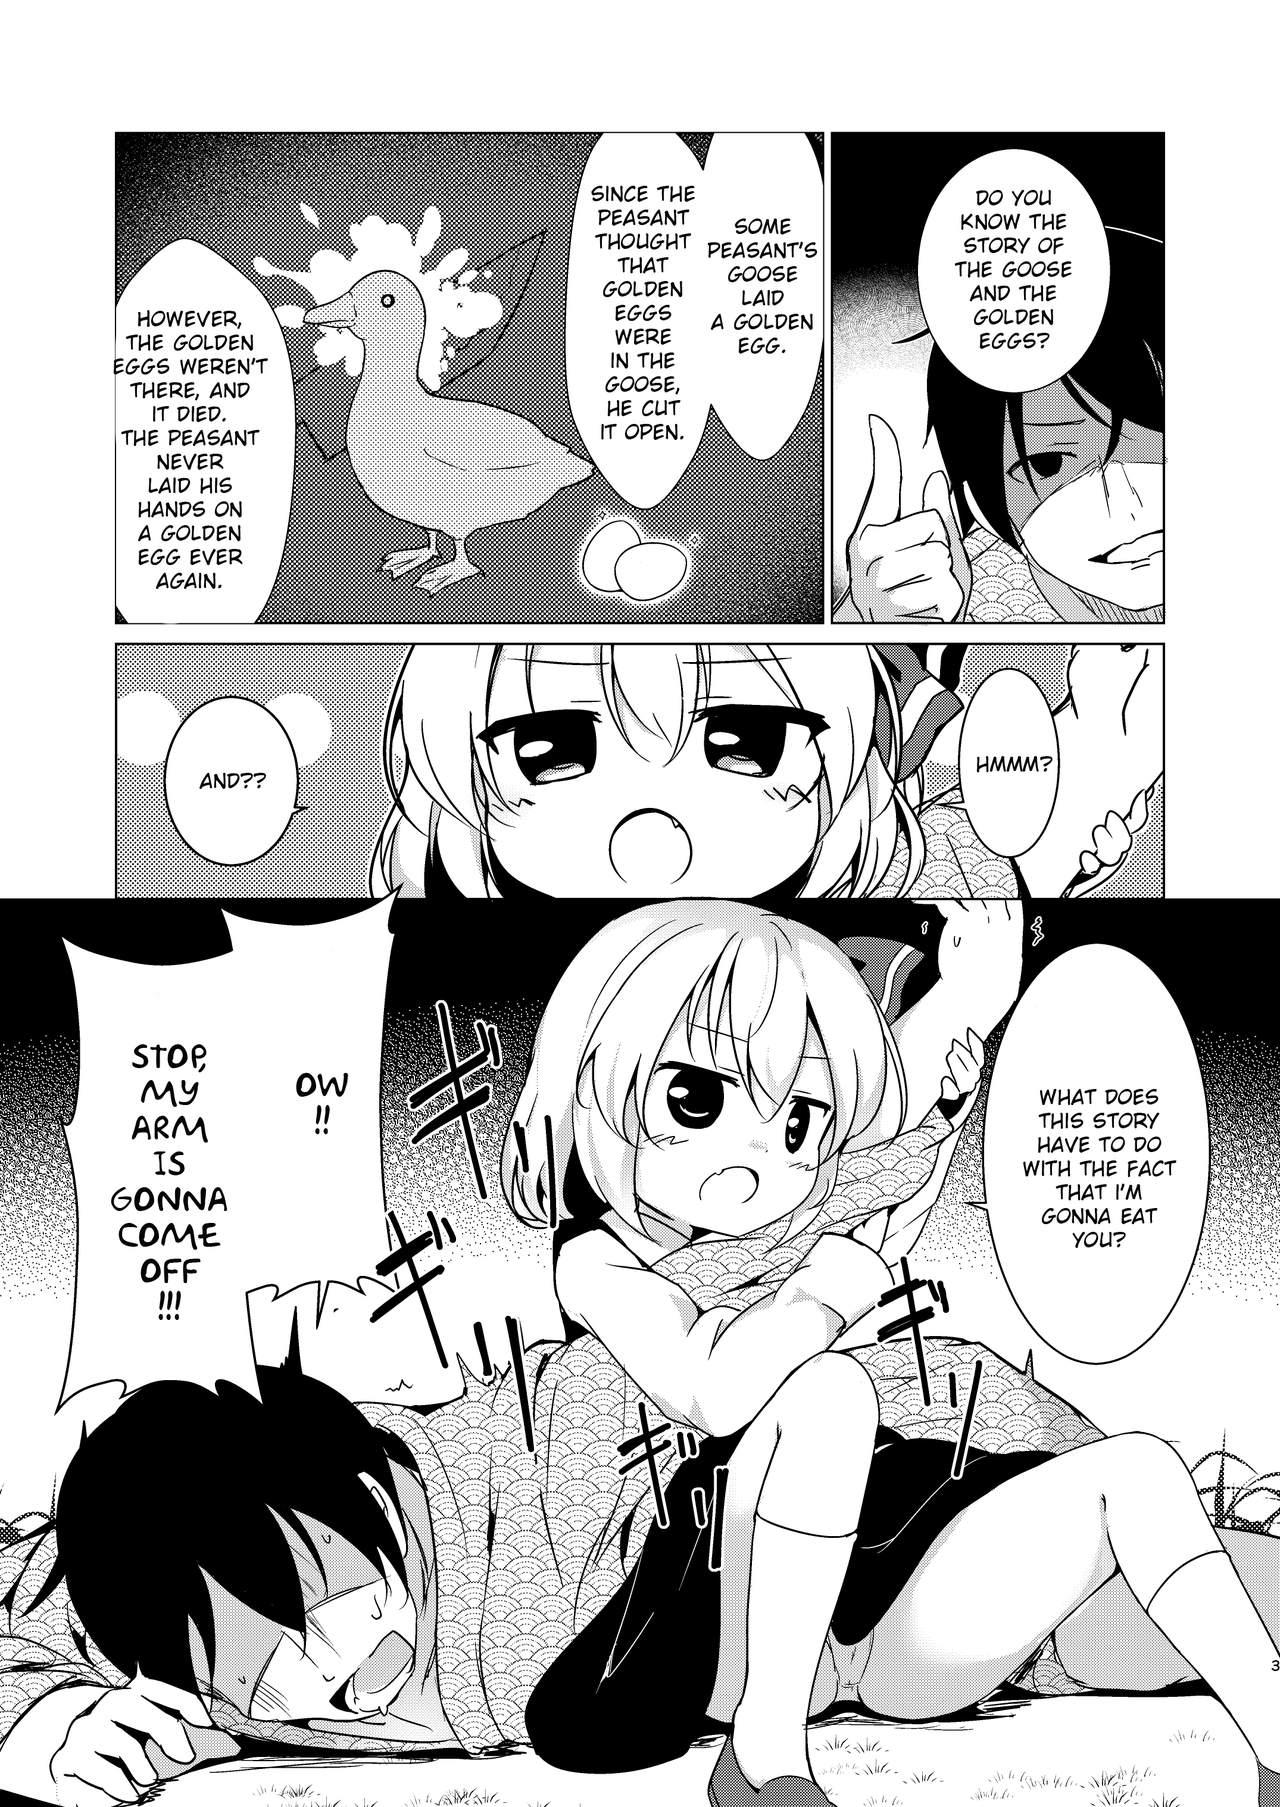 Bus Kin no Tamago - Touhou project Analsex - Page 2